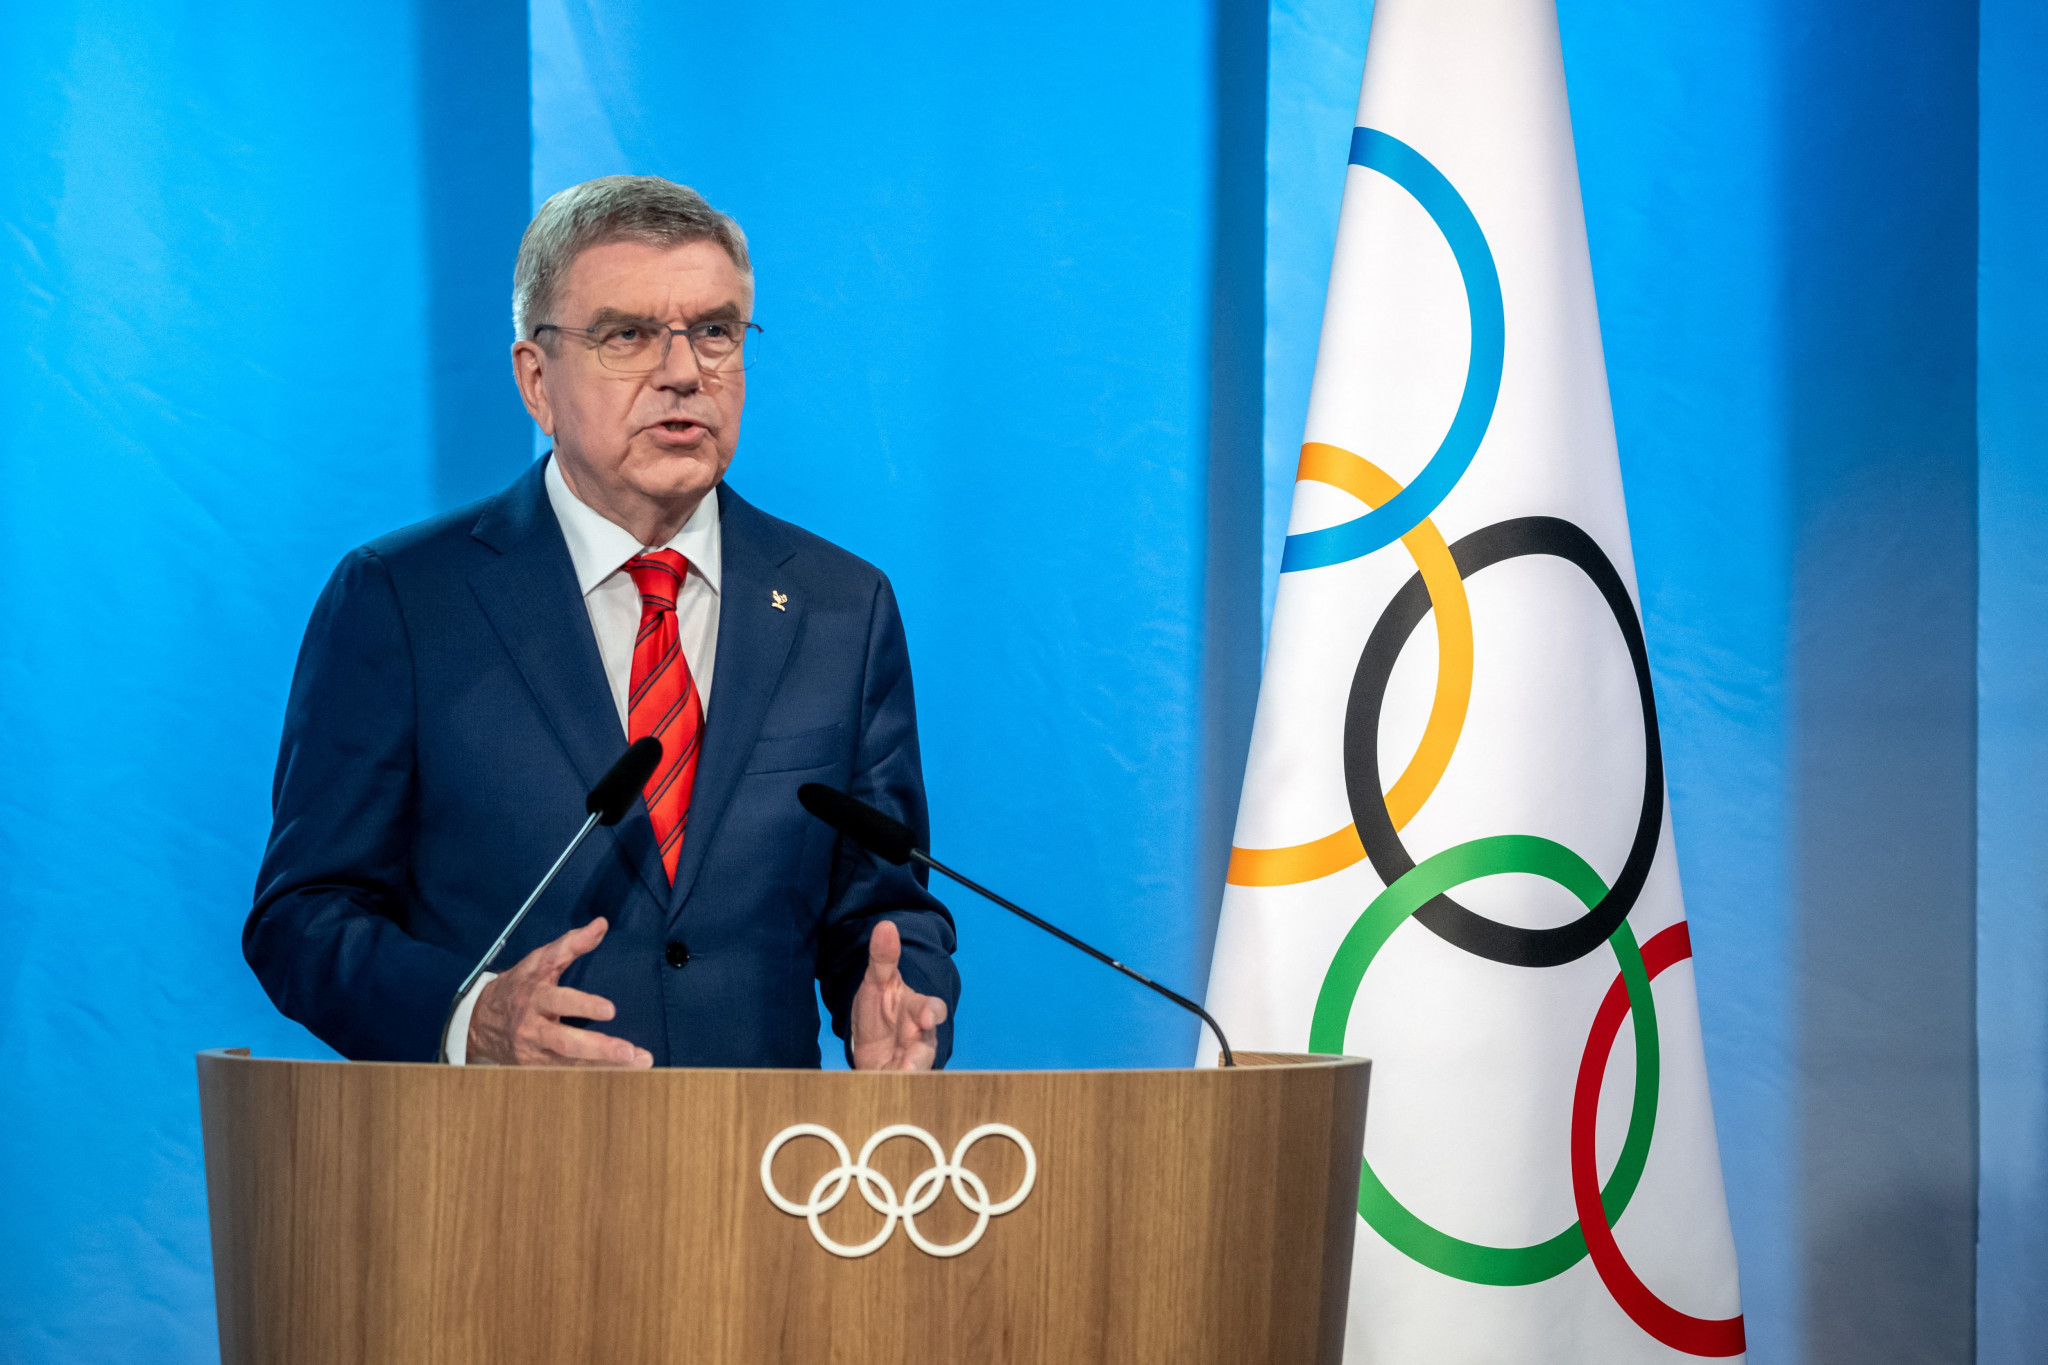 IOC President Thomas Bach has criticised Russia for 